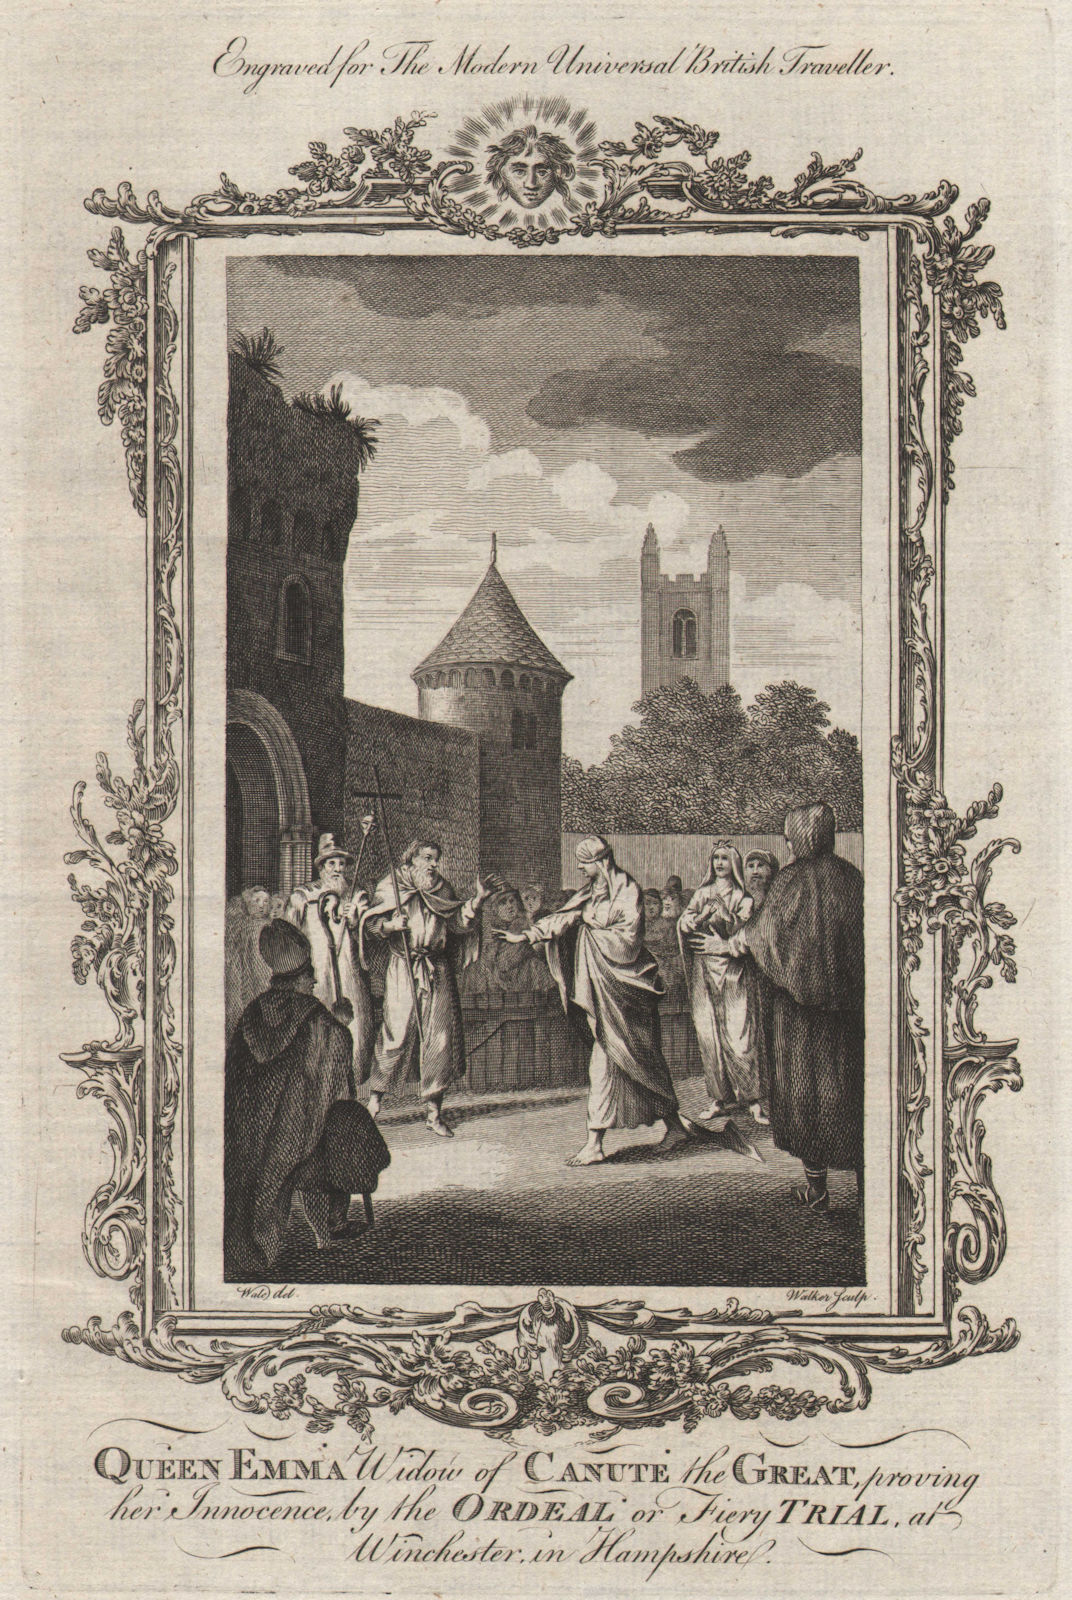 The ordeal of Queen Emma, widow of Canute the Great. Winchester. BURLINGTON 1779